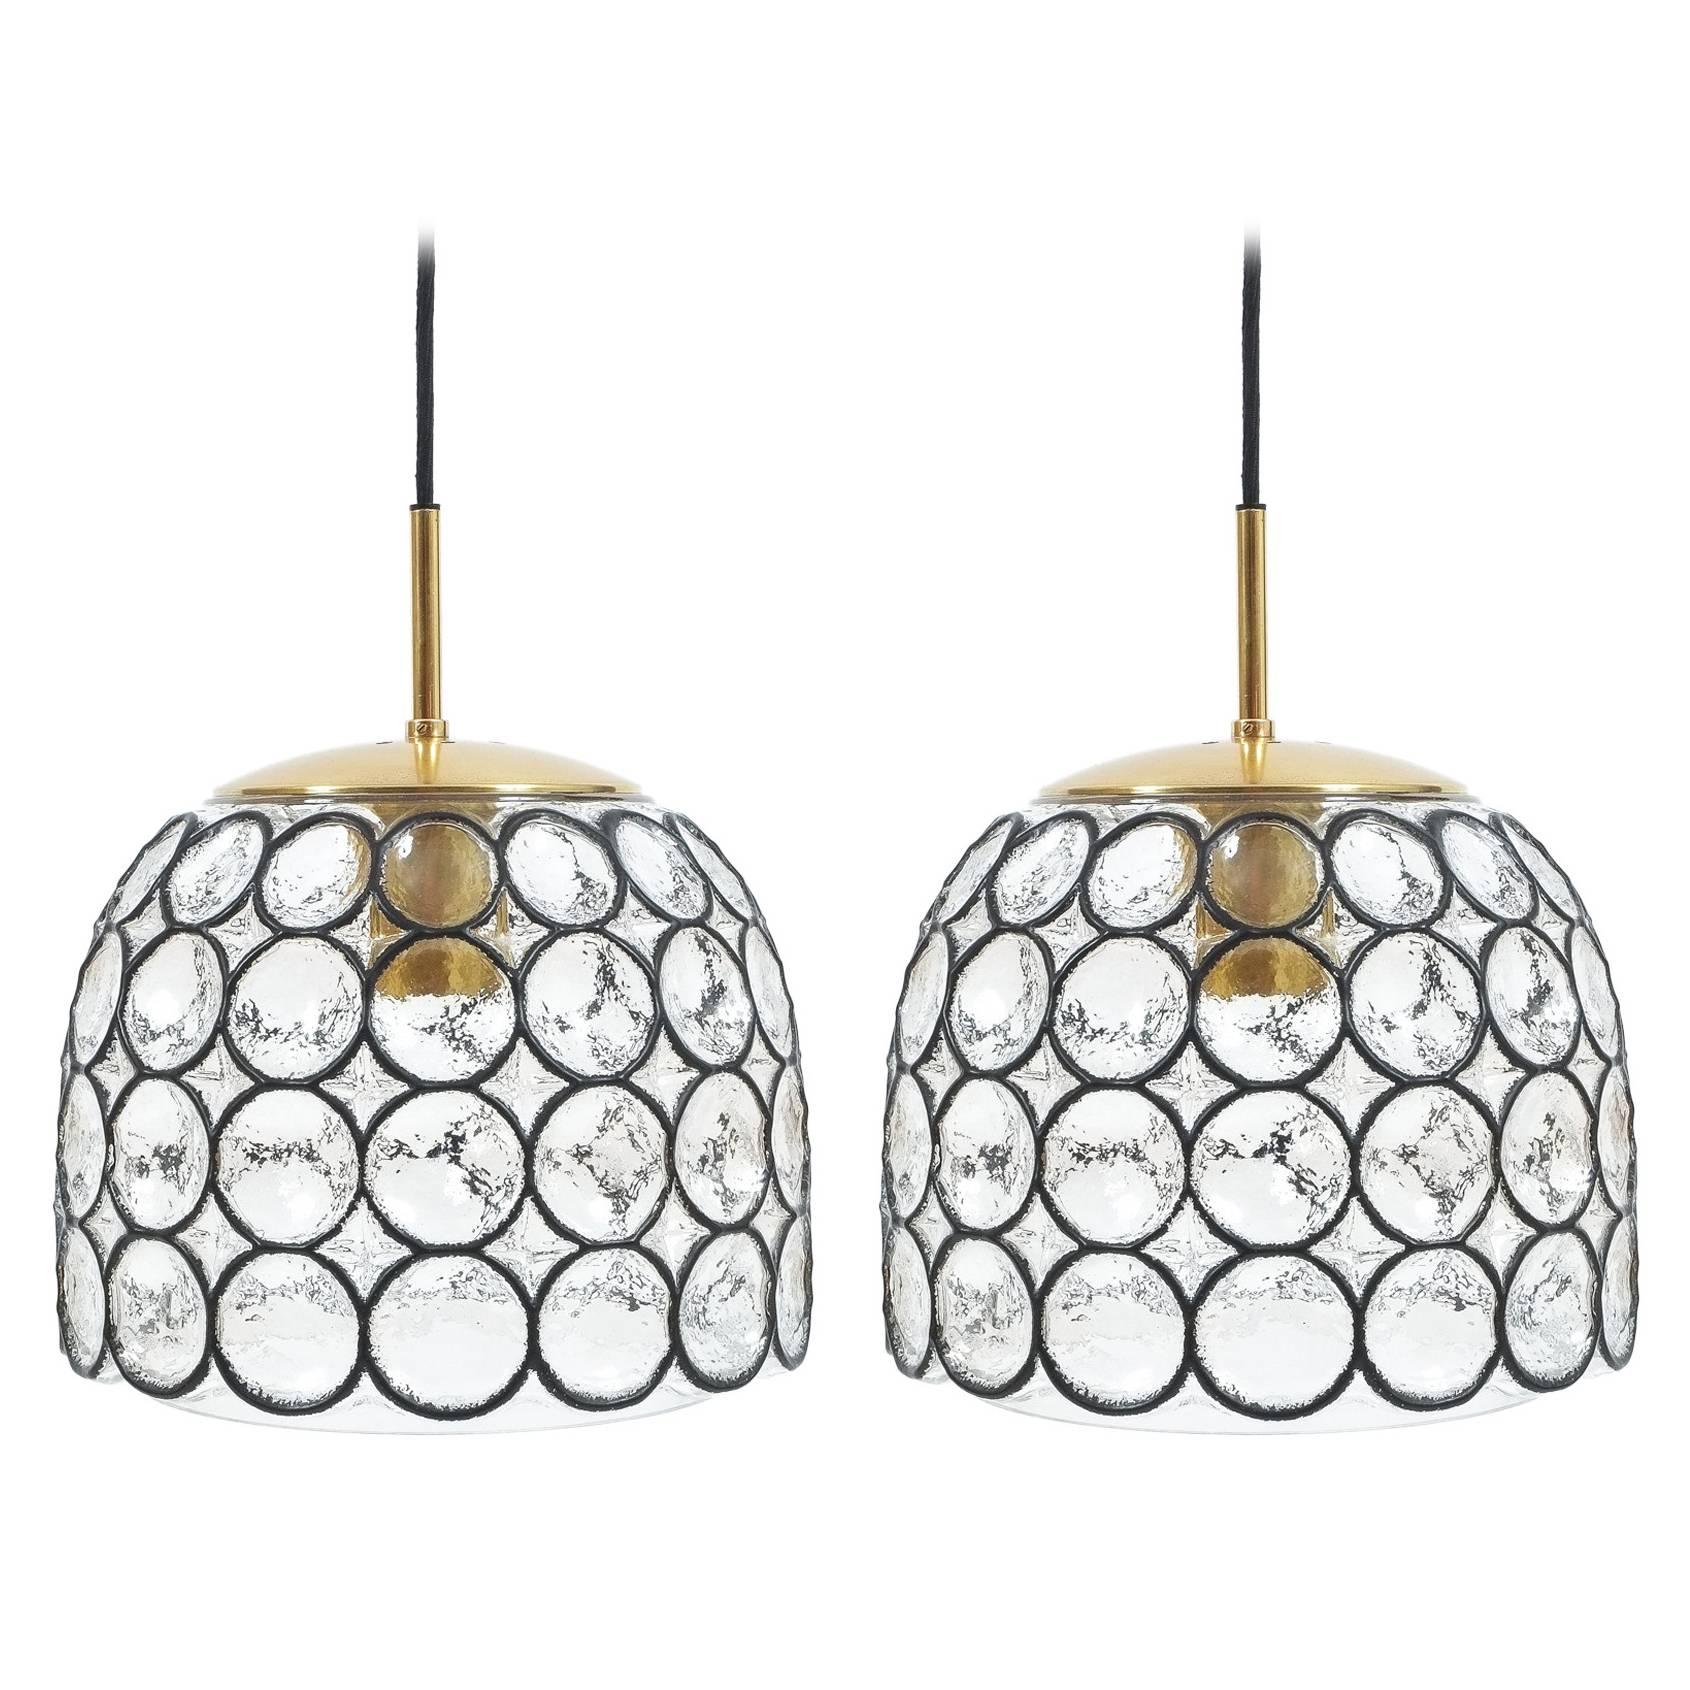 Pair of Large Iron and Glass Pendant Lamps by Limburg, 1960